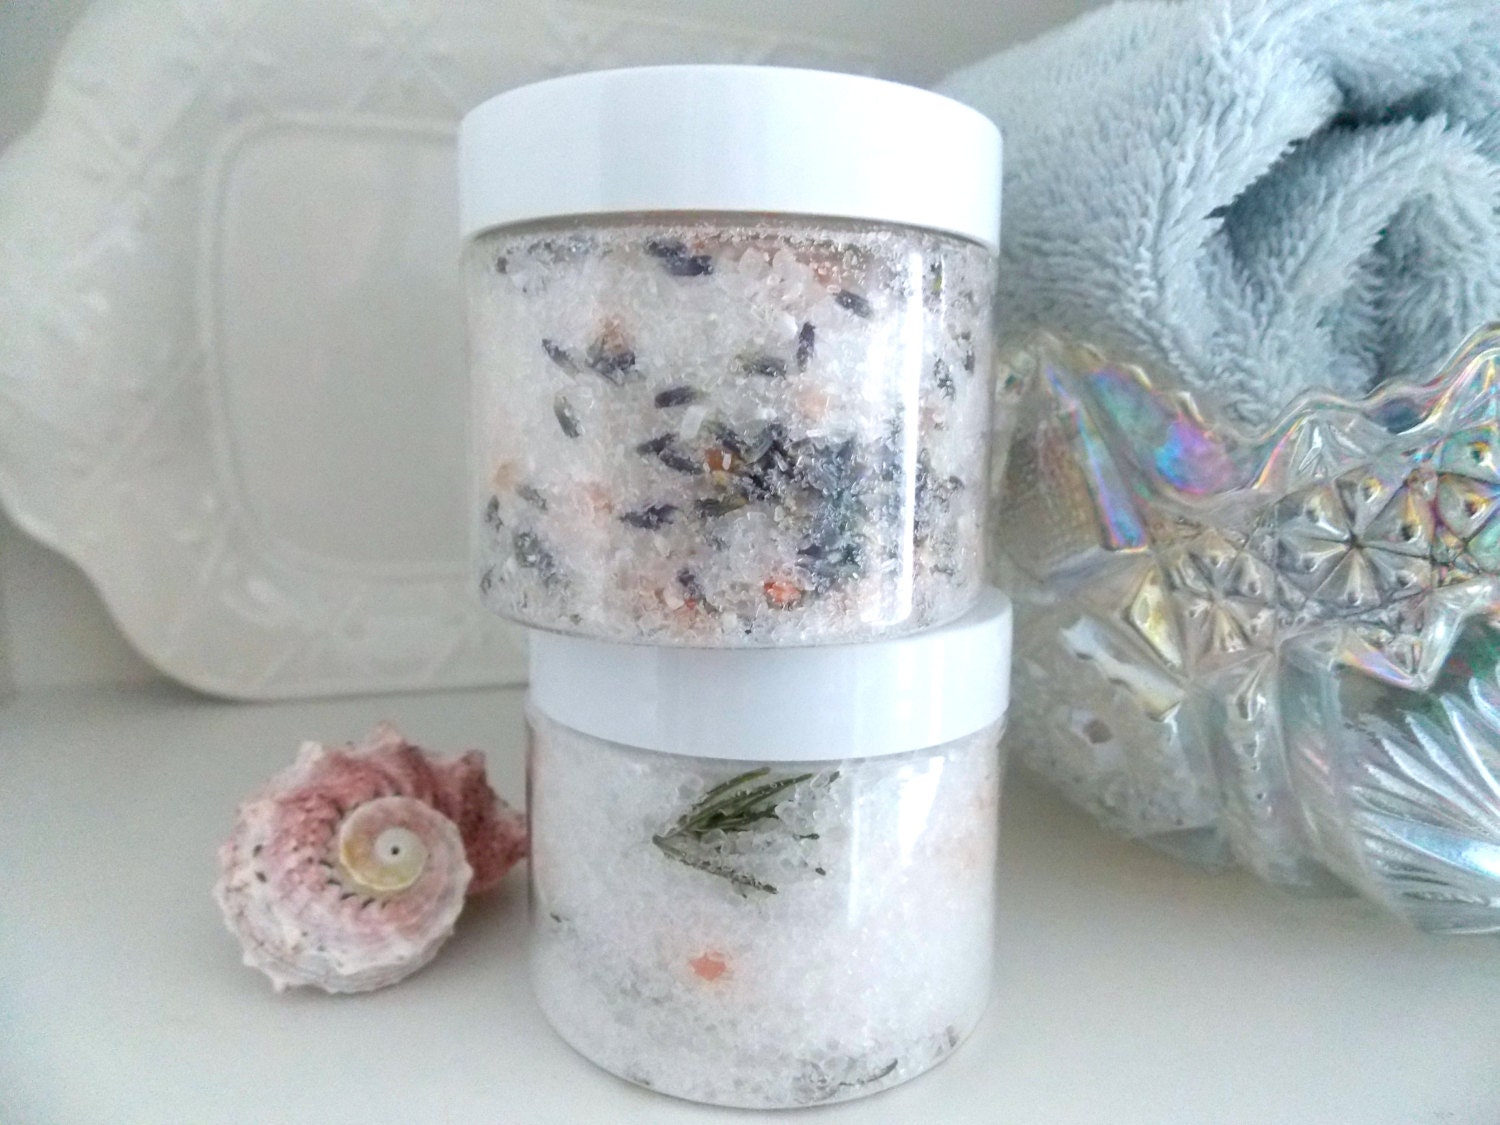 White LAVENDER or White ROSEMARY SOAK  made with pure essential oils and flowers - cherrytreelanesoap